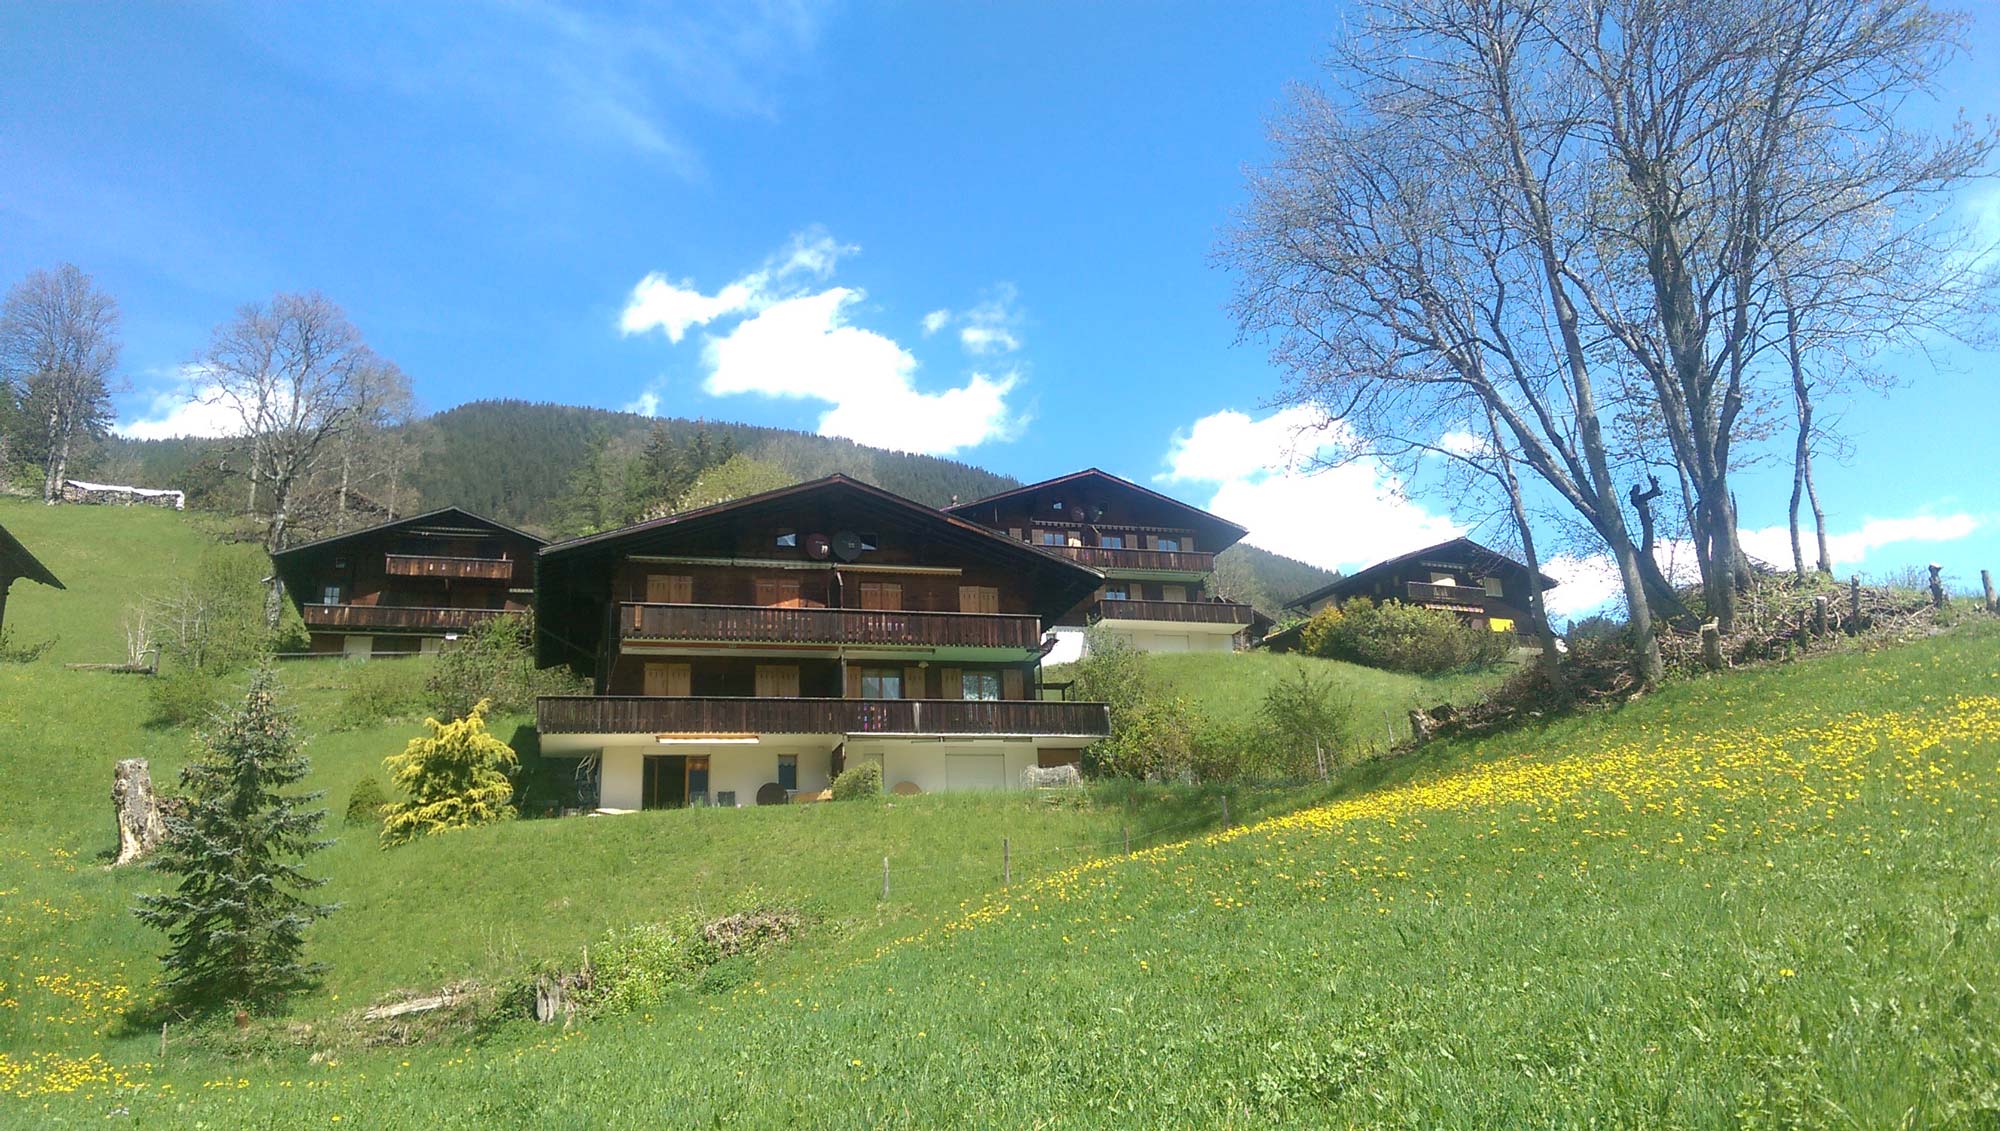 (c) Apartments-grindelwald.ch